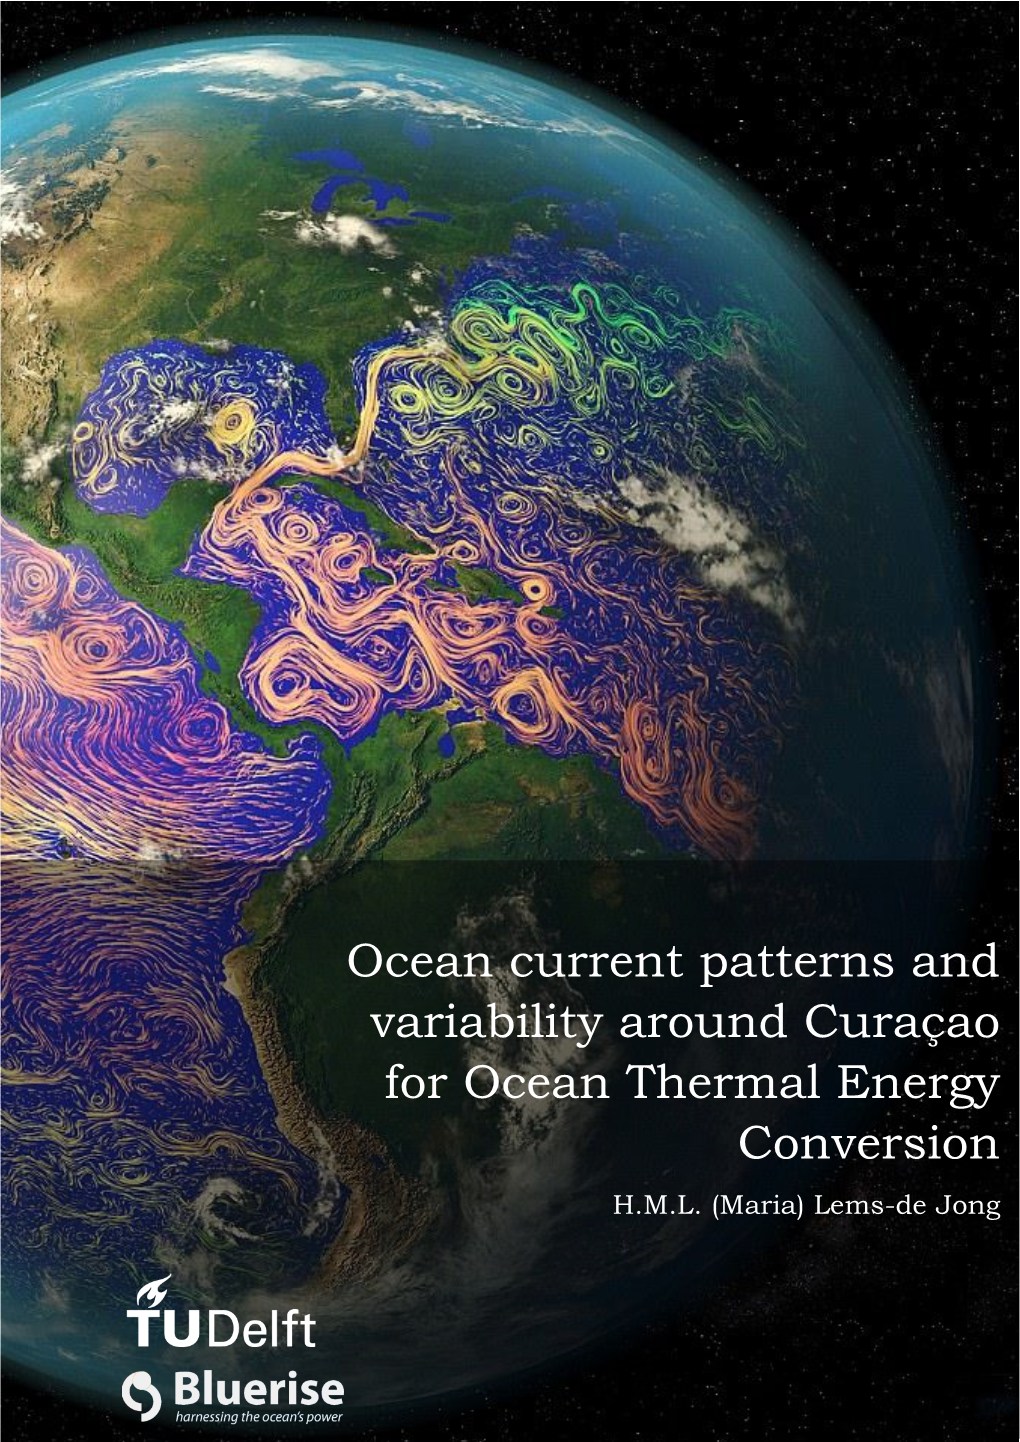 Ocean Current Patterns and Variability Around Curaçao for Ocean Thermal Energy Conversion H.M.L